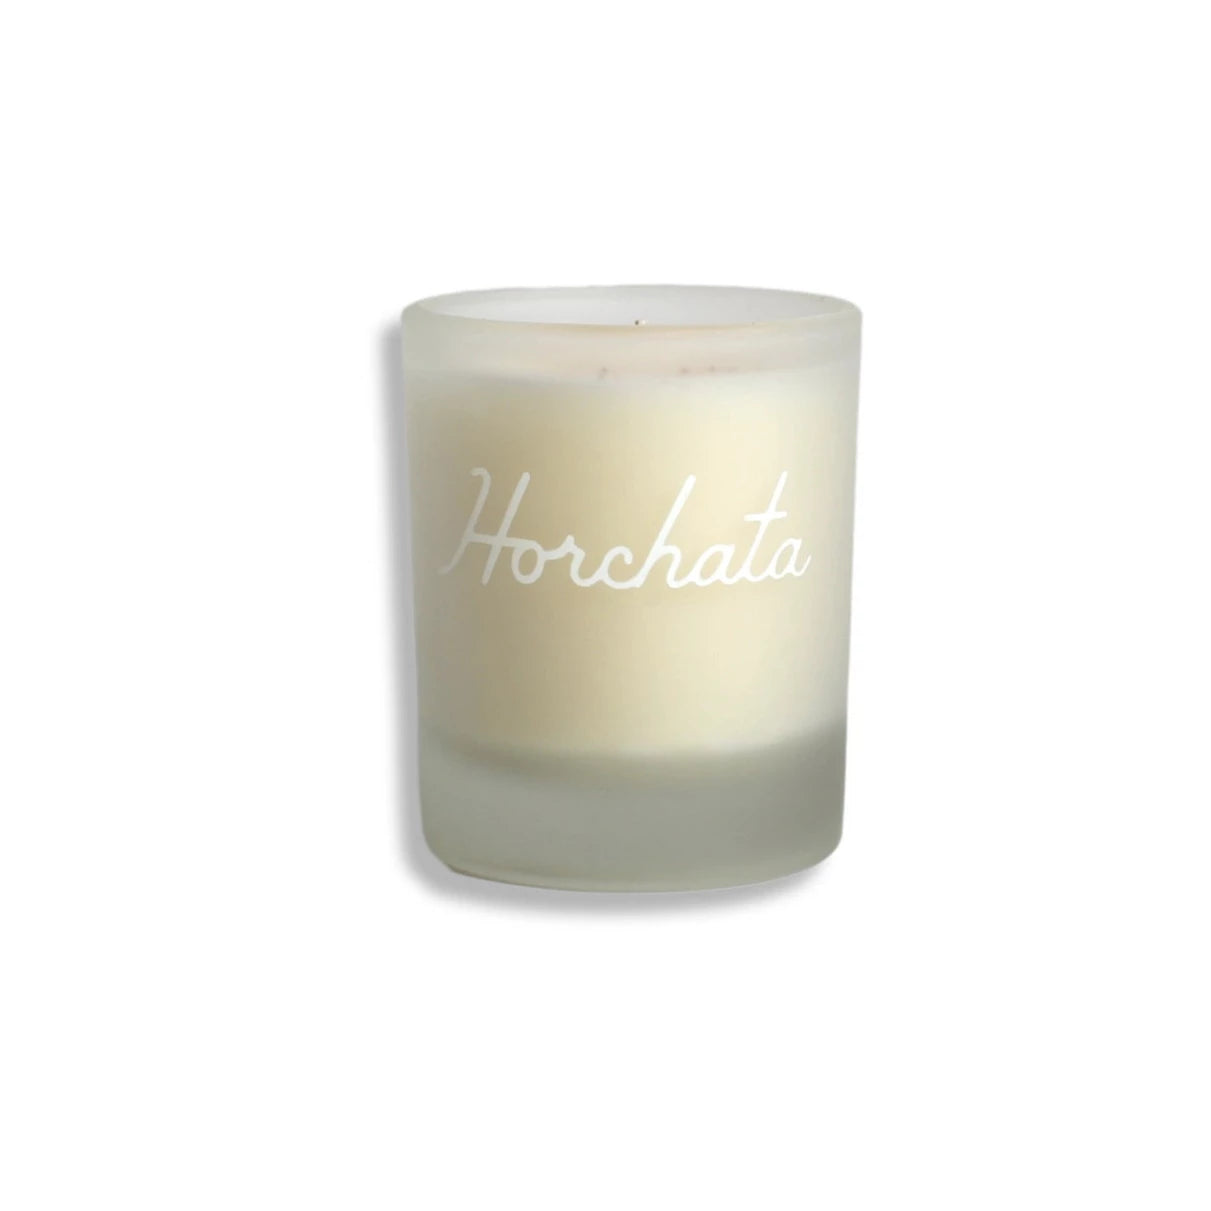 Small white horchata (cinnamon & vanilla) scented candle. Candle reads Horchata in cursive with white lettering. 